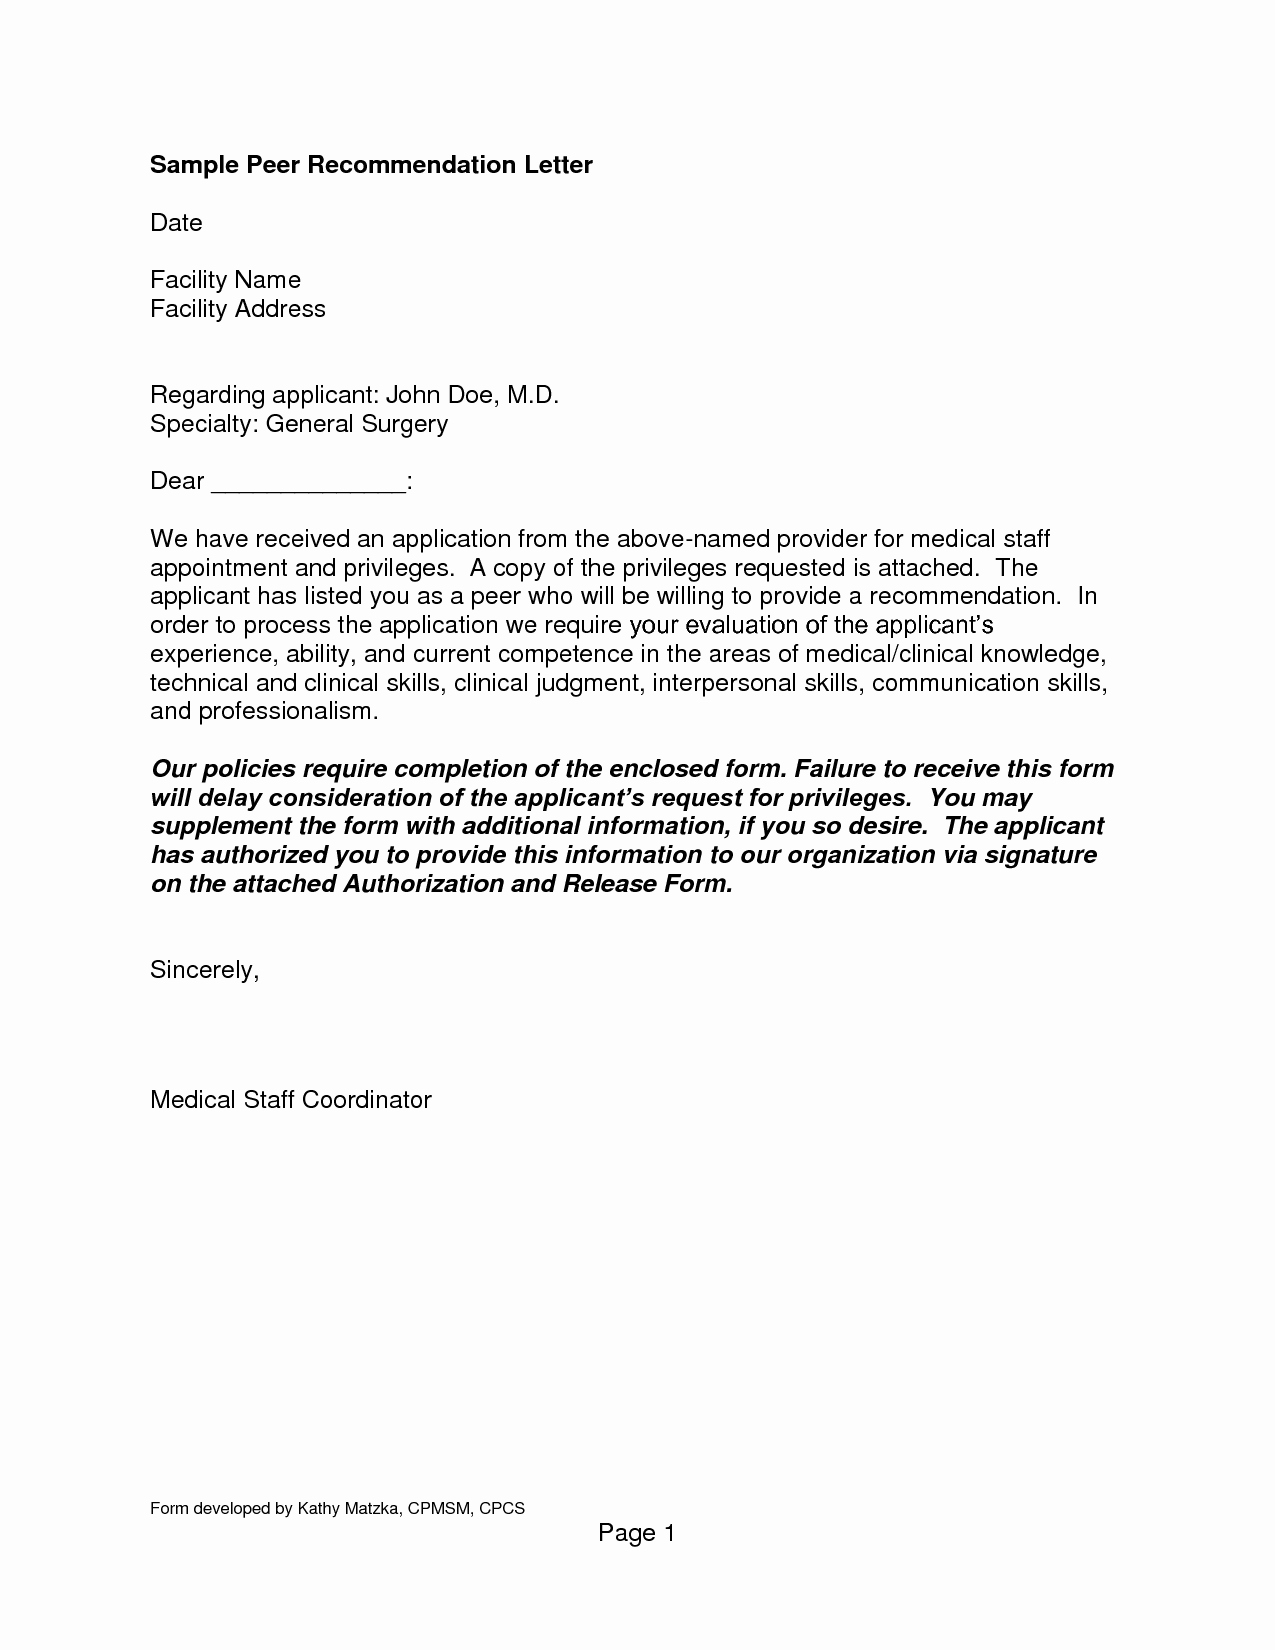 Reference Letter for Employee Template Awesome Reference Letter Template Letter Of Re Mendation format